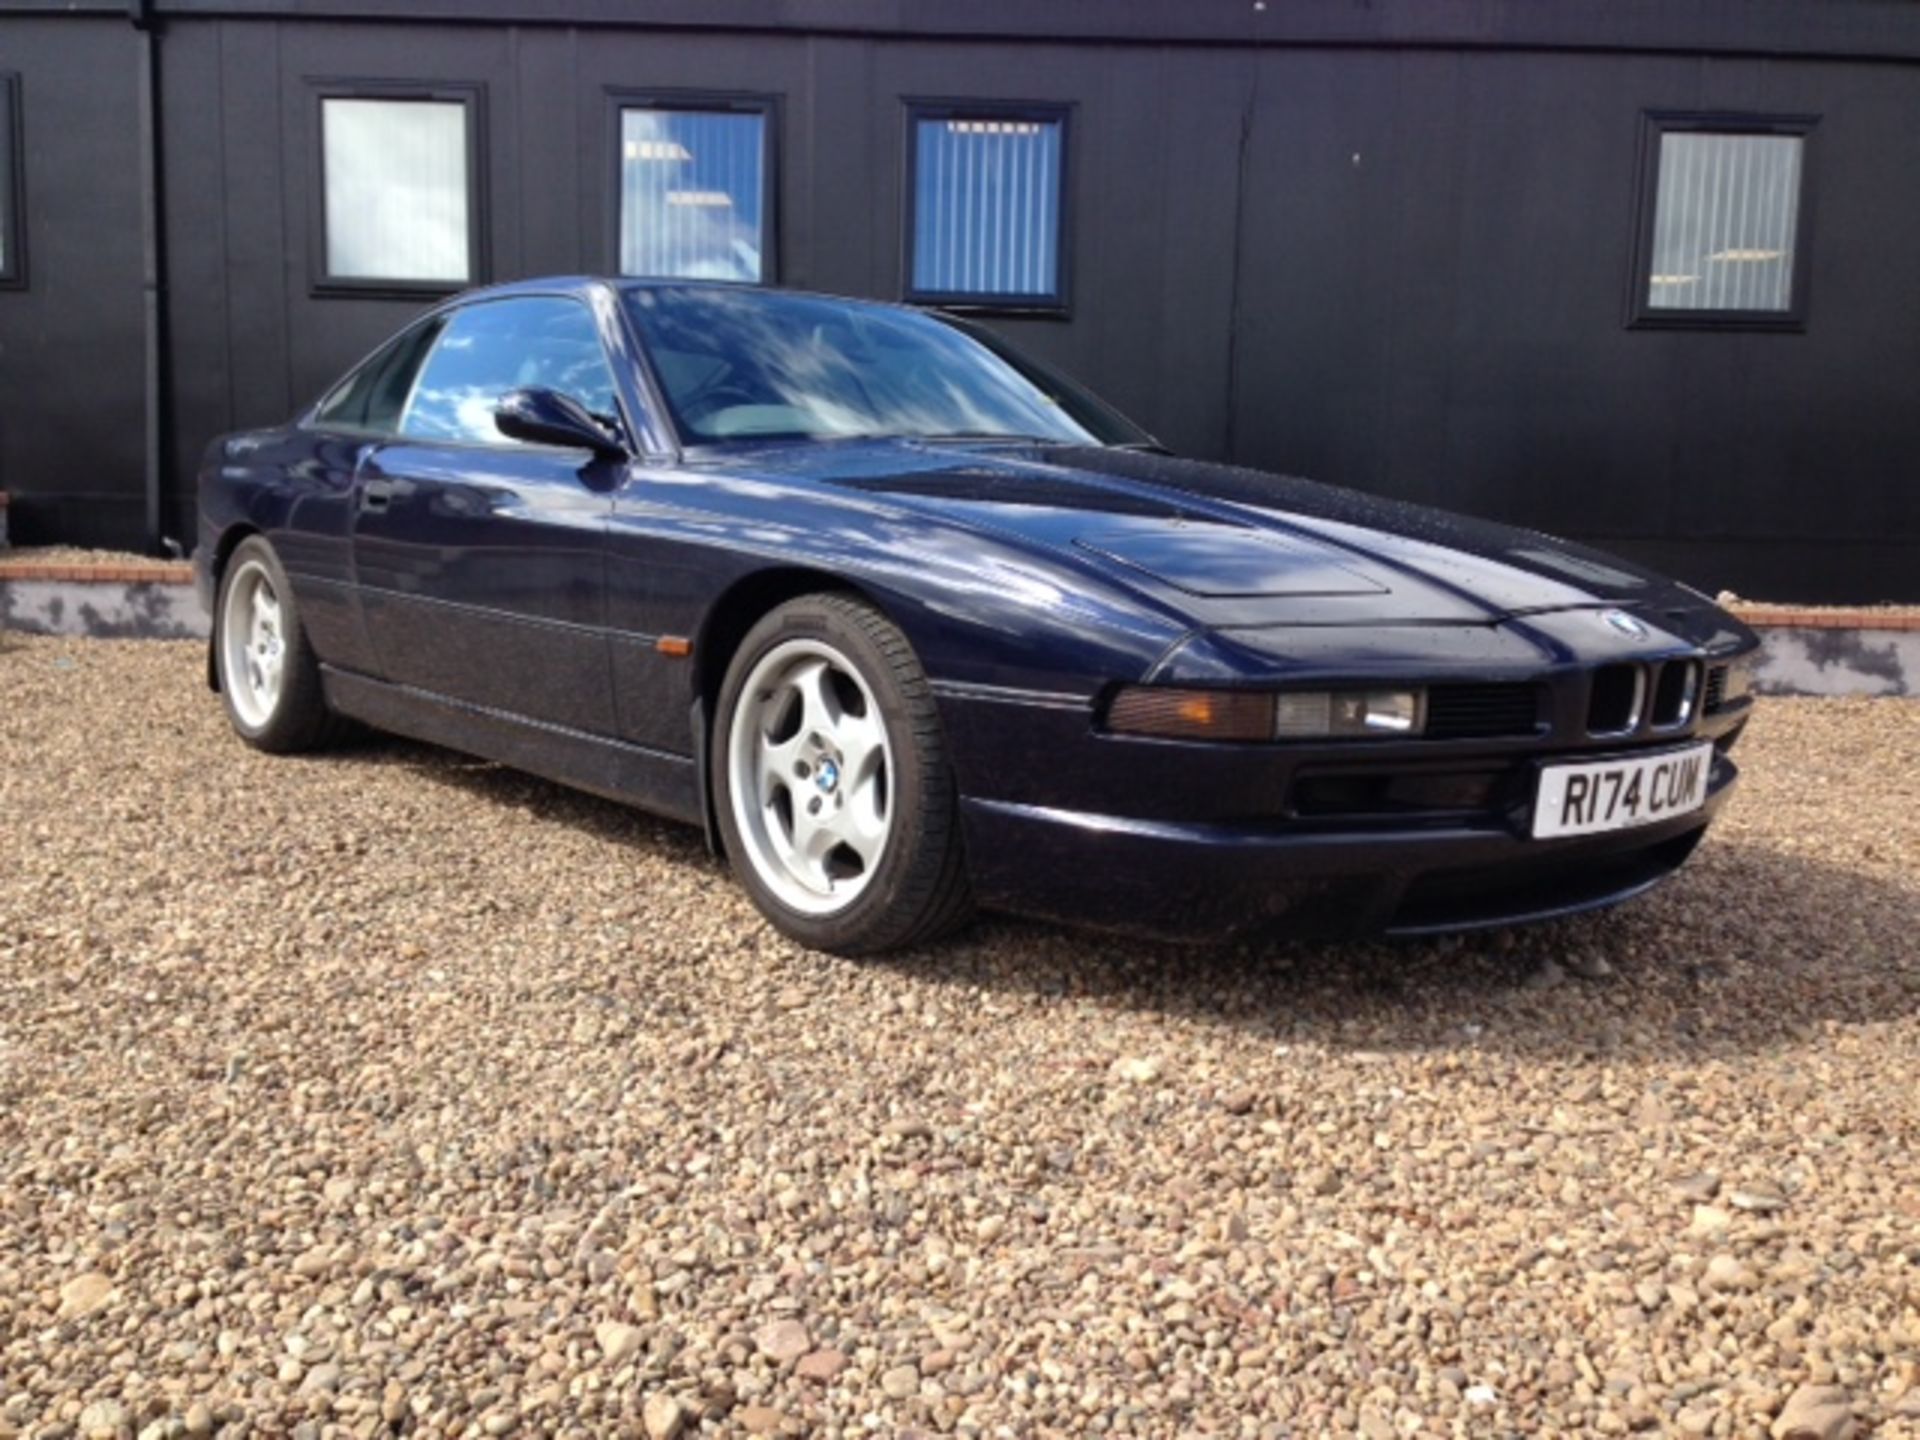 BMW, 840CI AUTO - 4398cc, Chassis number WBAEF82030CC66675 - finished in Orient Blue with Grey